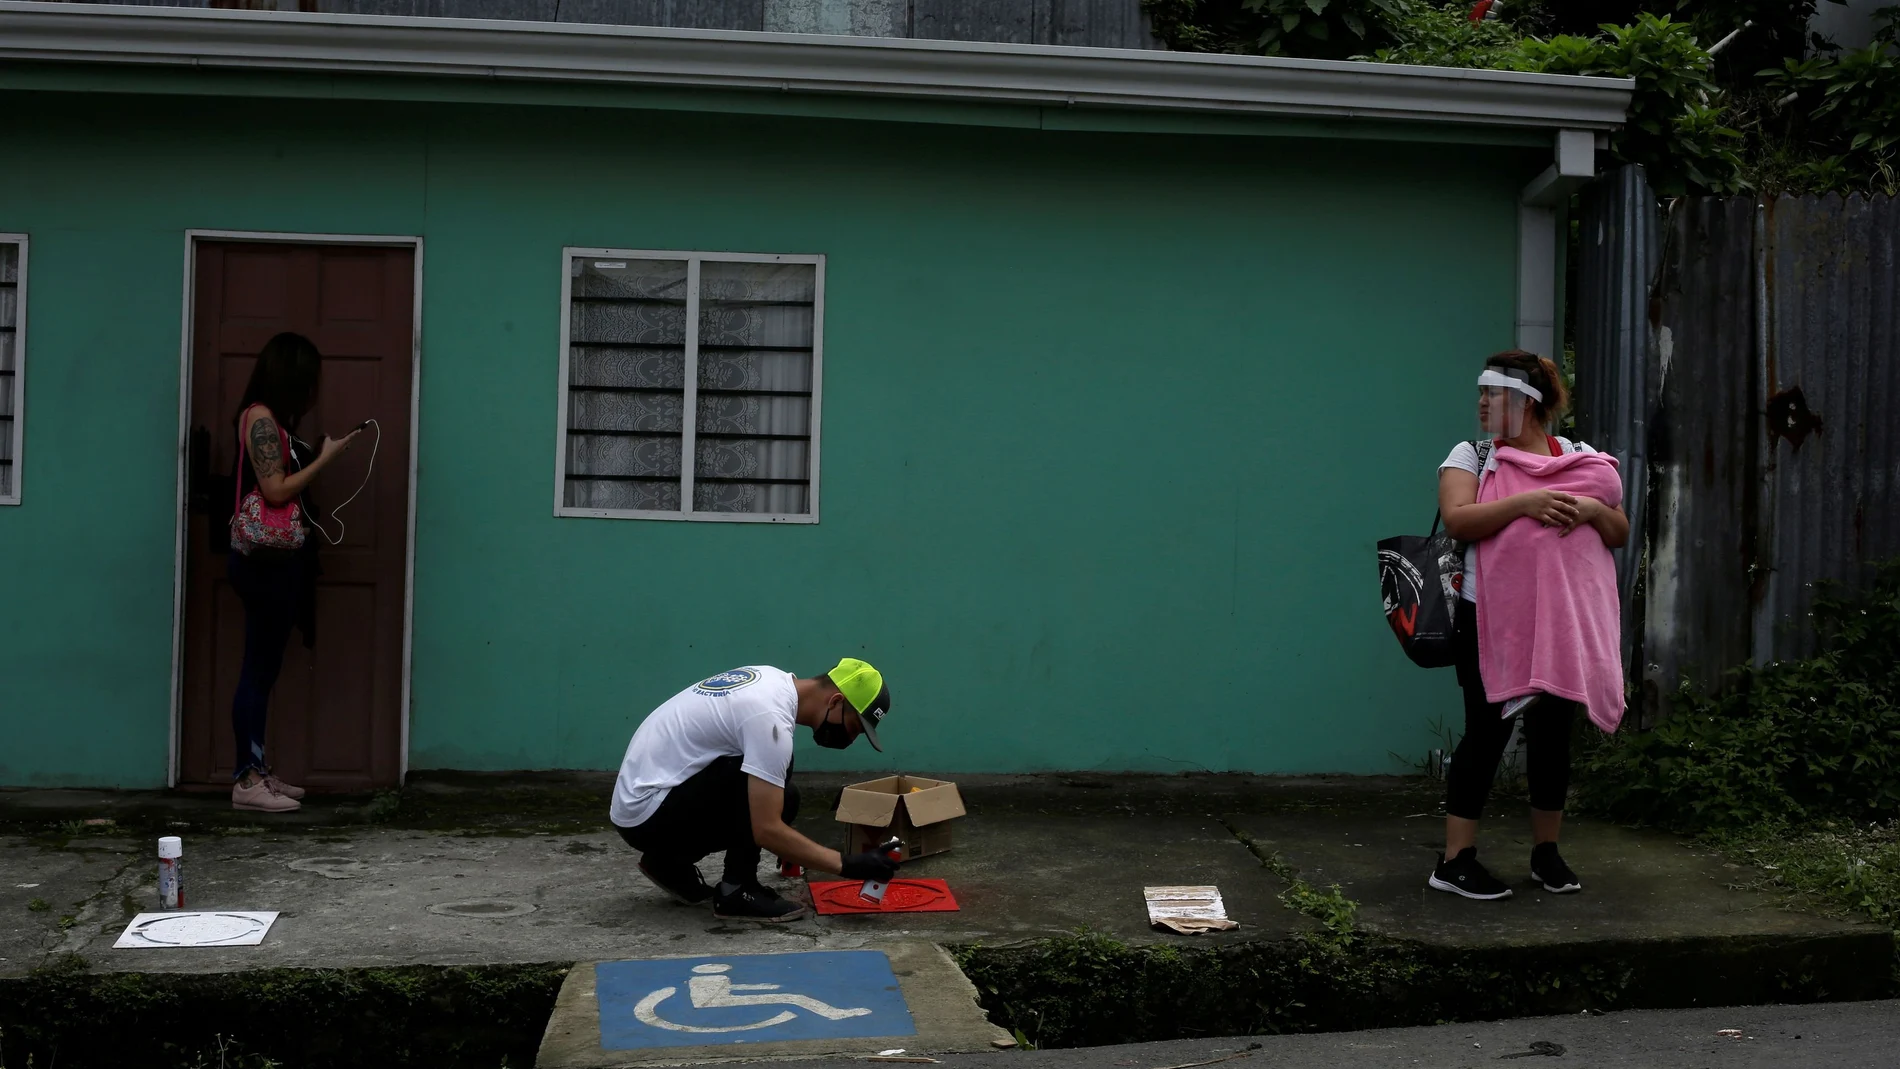 FILE PHOTO: A worker sprays paint on a stencil indicating social distancing on the floor of a bus stop, as the spread of the coronavirus disease (COVID-19) continues, in San Jose, Costa Rica July 24, 2020. REUTERS/Juan Carlos Ulate/File Photo